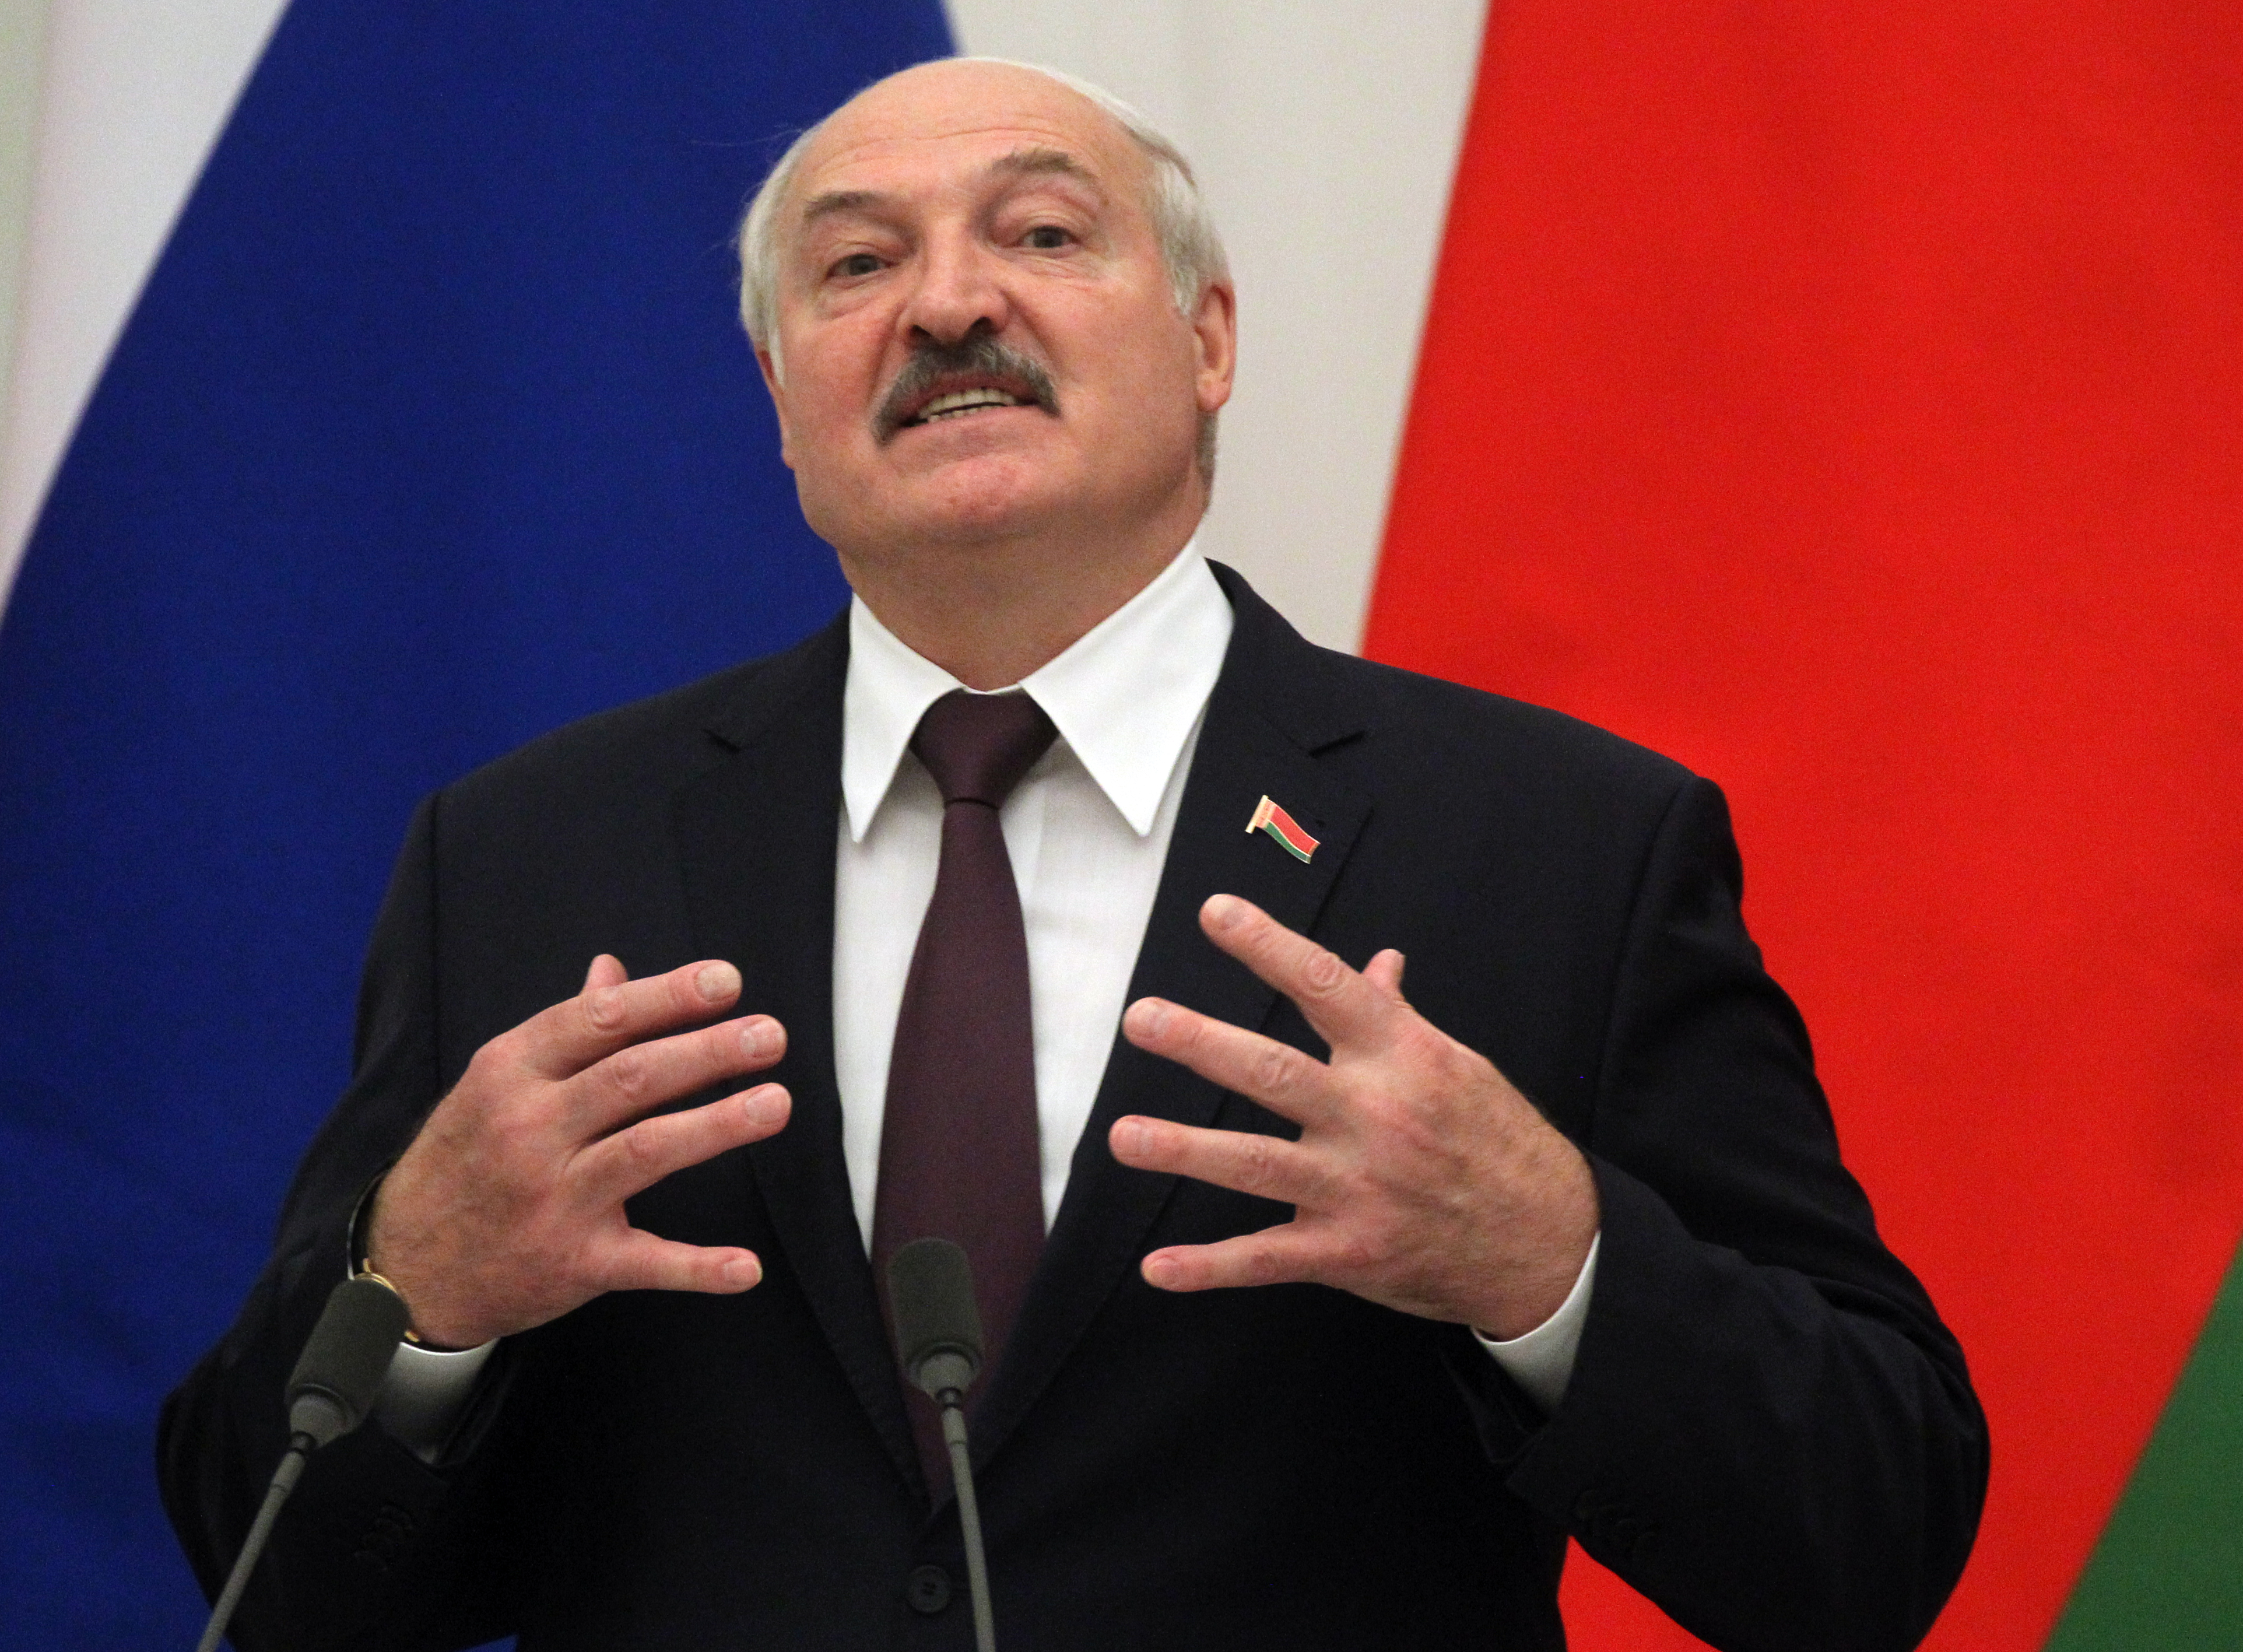 Belarus to expand use of death penalty. Democratic forces, rail guerrillas under threat